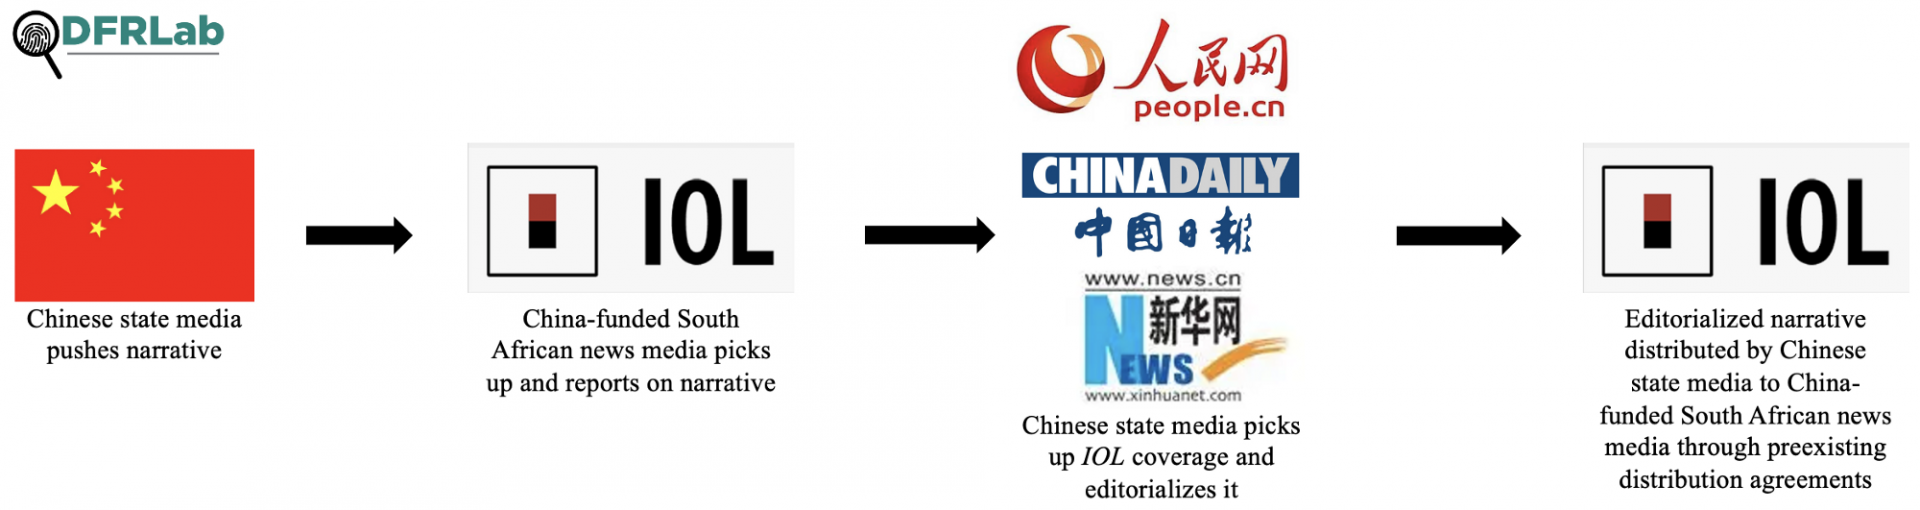 Graphic depicting the standard flow of the China-positive narratives, starting with Chinese state media pushing a particular narrative, which is then picked up by China-funded local outlets. These stories are then editorialized in official state media channels, using the local reporting as a pretext to support the argument. These stories from state media are then pushed back into the local environment through distribution agreements. 